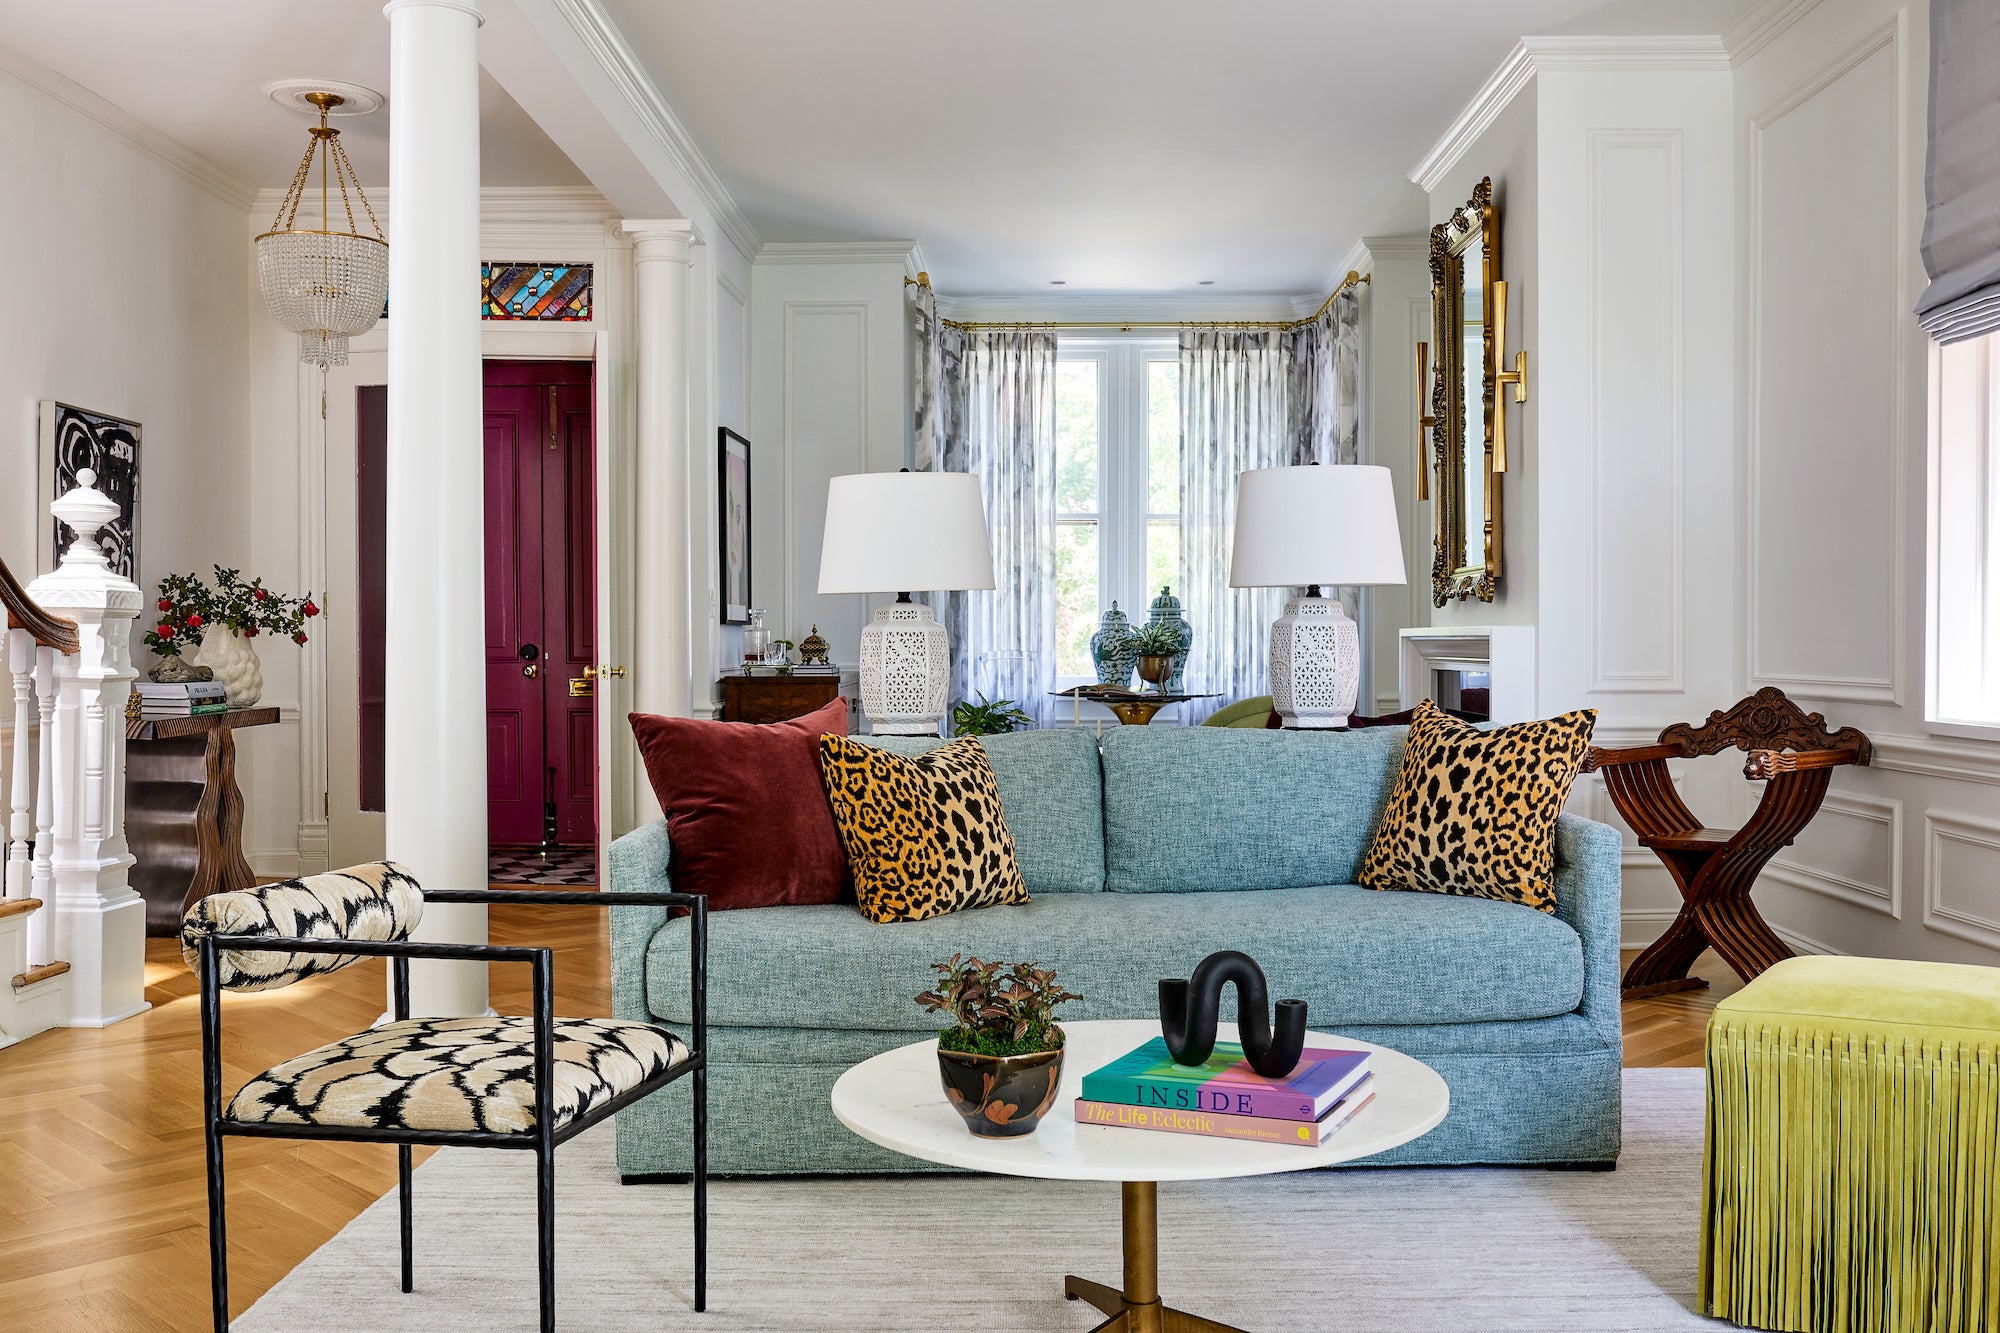 A living area with white walls, contrasted by colorful furnishings, by Lisa & Leroy.